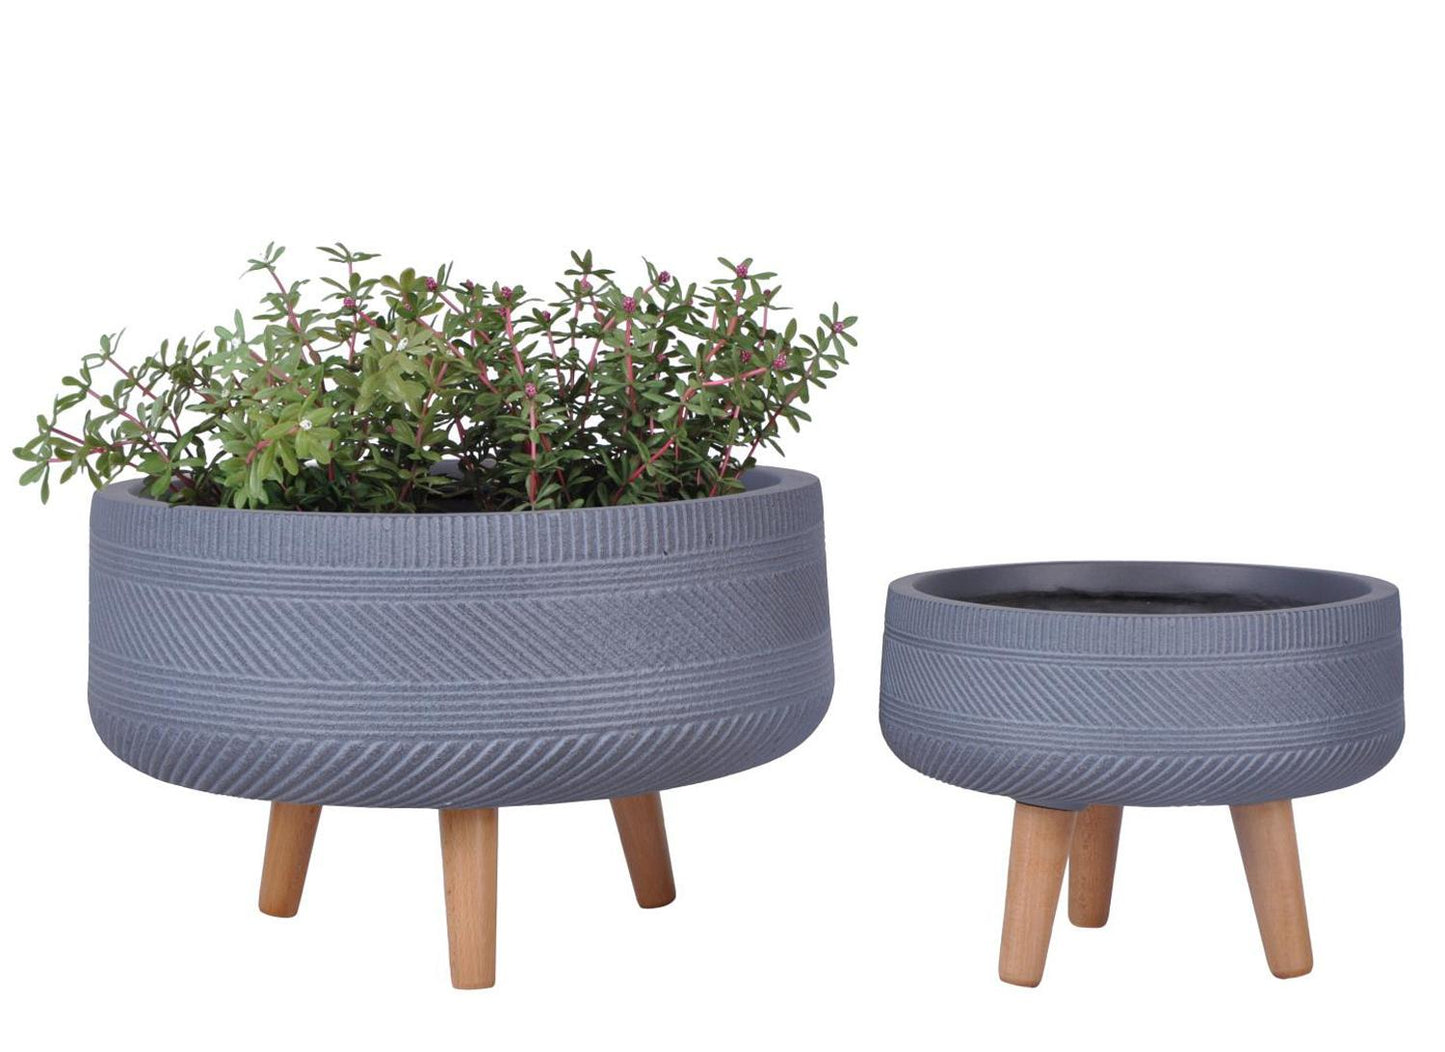 Striped Grey Tray Round Indoor Planter on Legs by Idealist Lite D29.5 H22 cm, 5.9L - citiplants.com